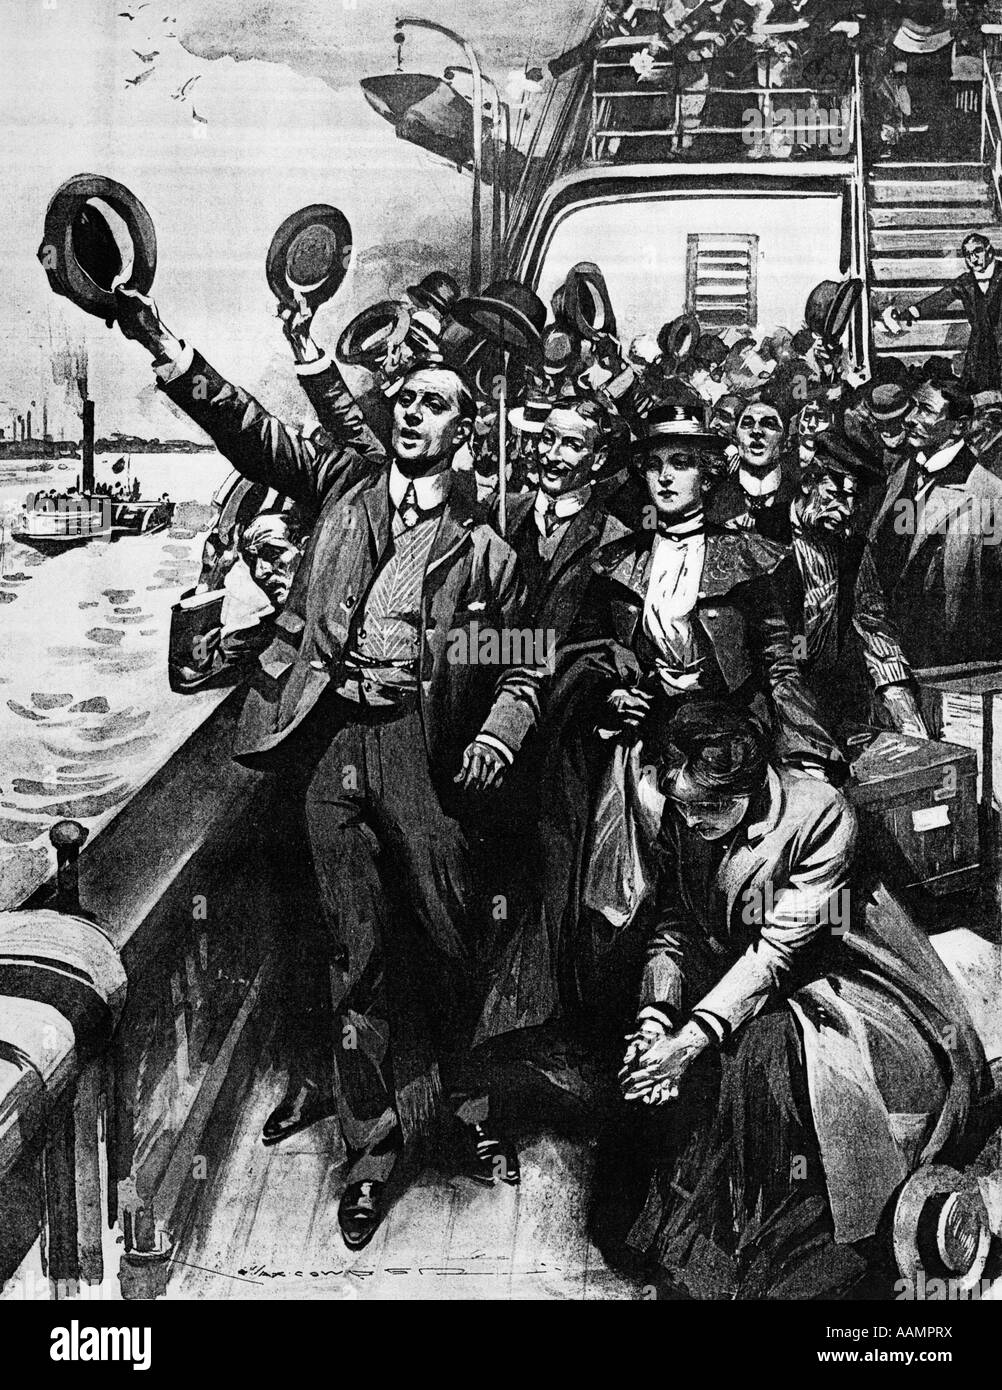 1903 DRAWING OF GROUP OF IMMIGRANTS ON DECK OF SHIP WAVING HATS SAD WOMAN ON LOWER RIGHT Stock Photo